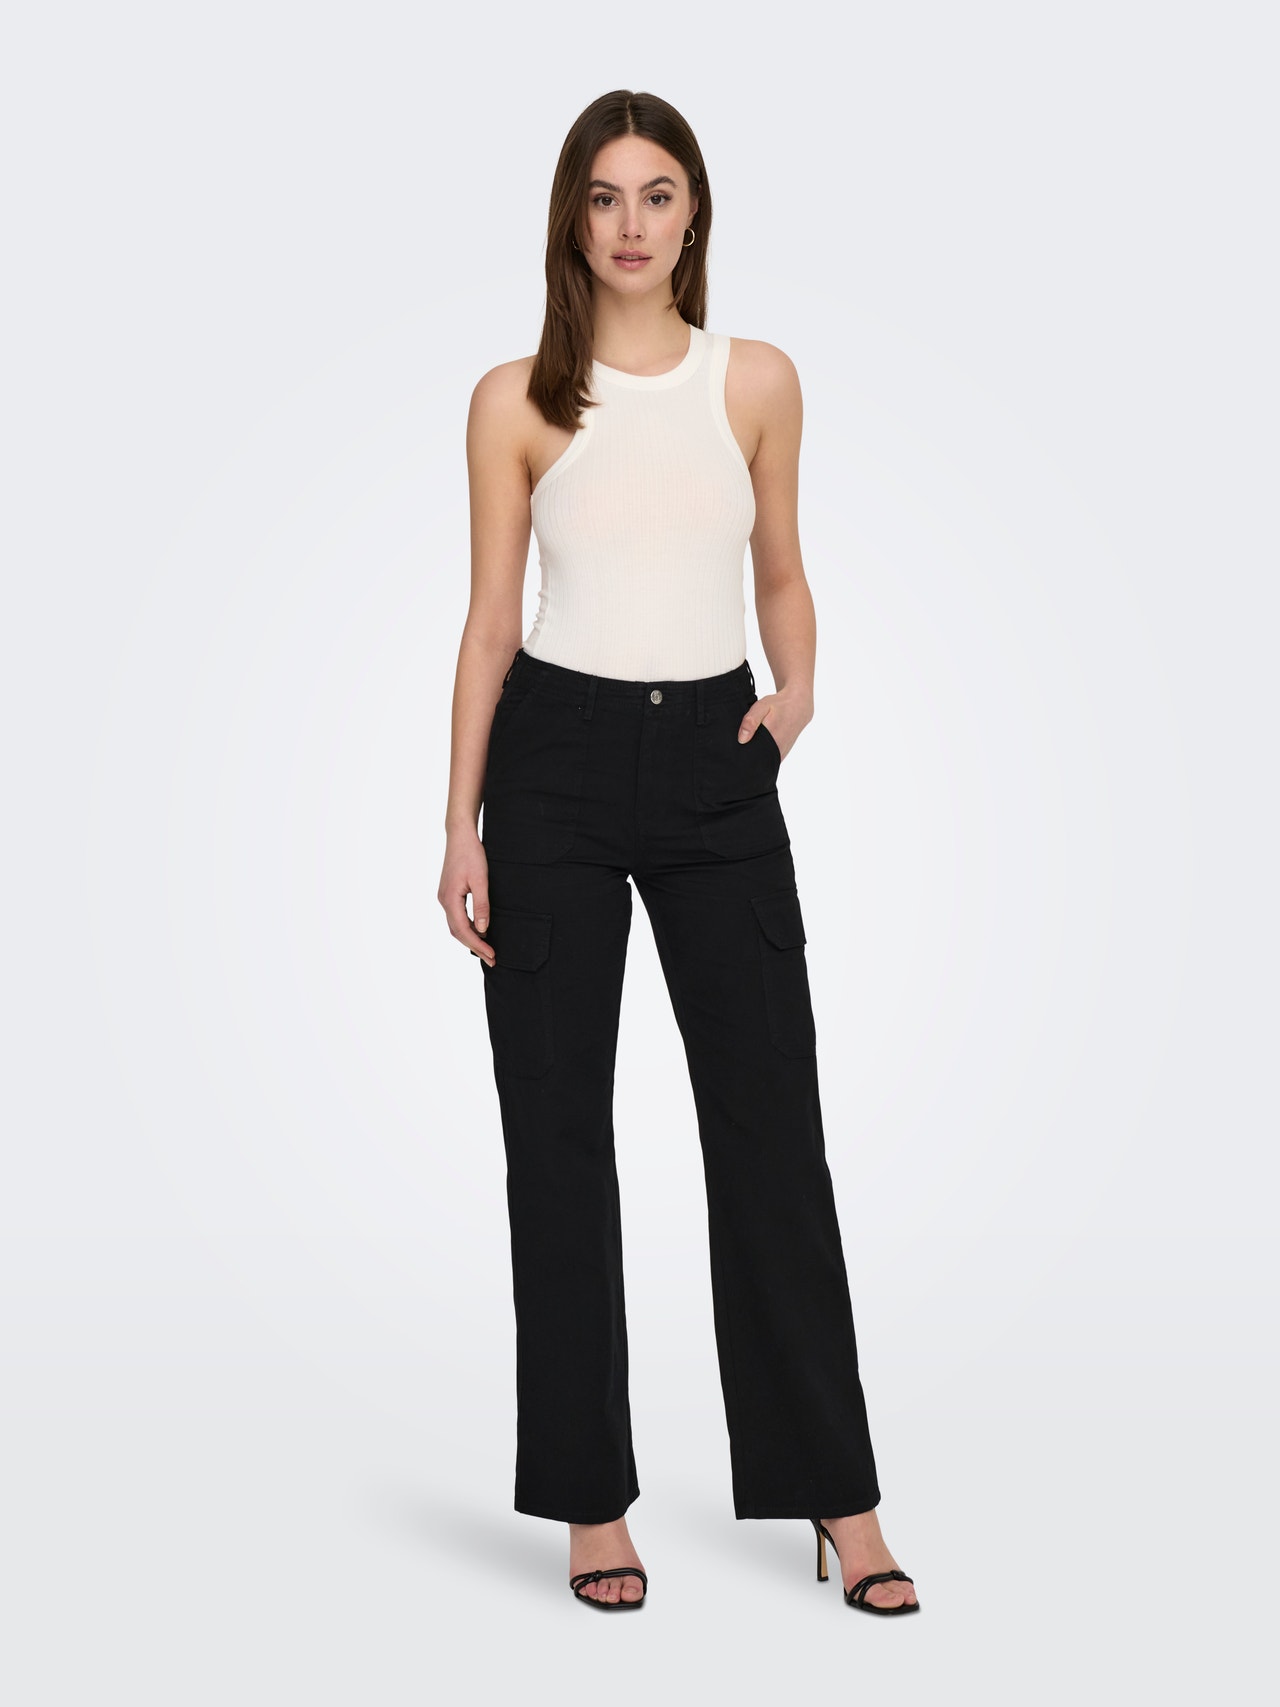 ONLY High waisted cargo trousers -Black - 15300808